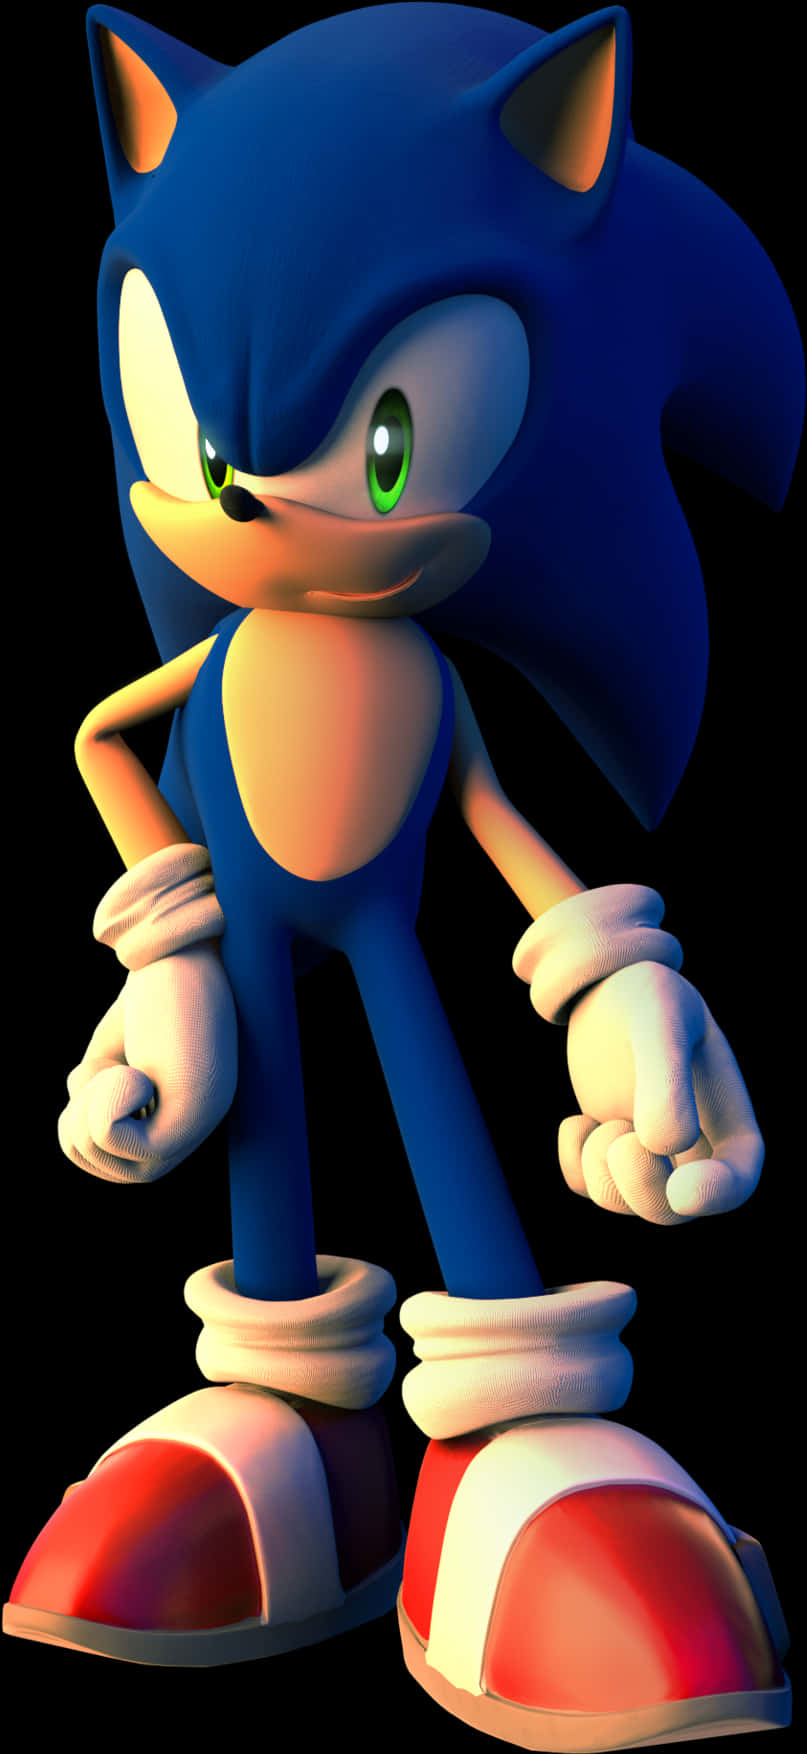 Sonicthe Hedgehog Standing Pose PNG image